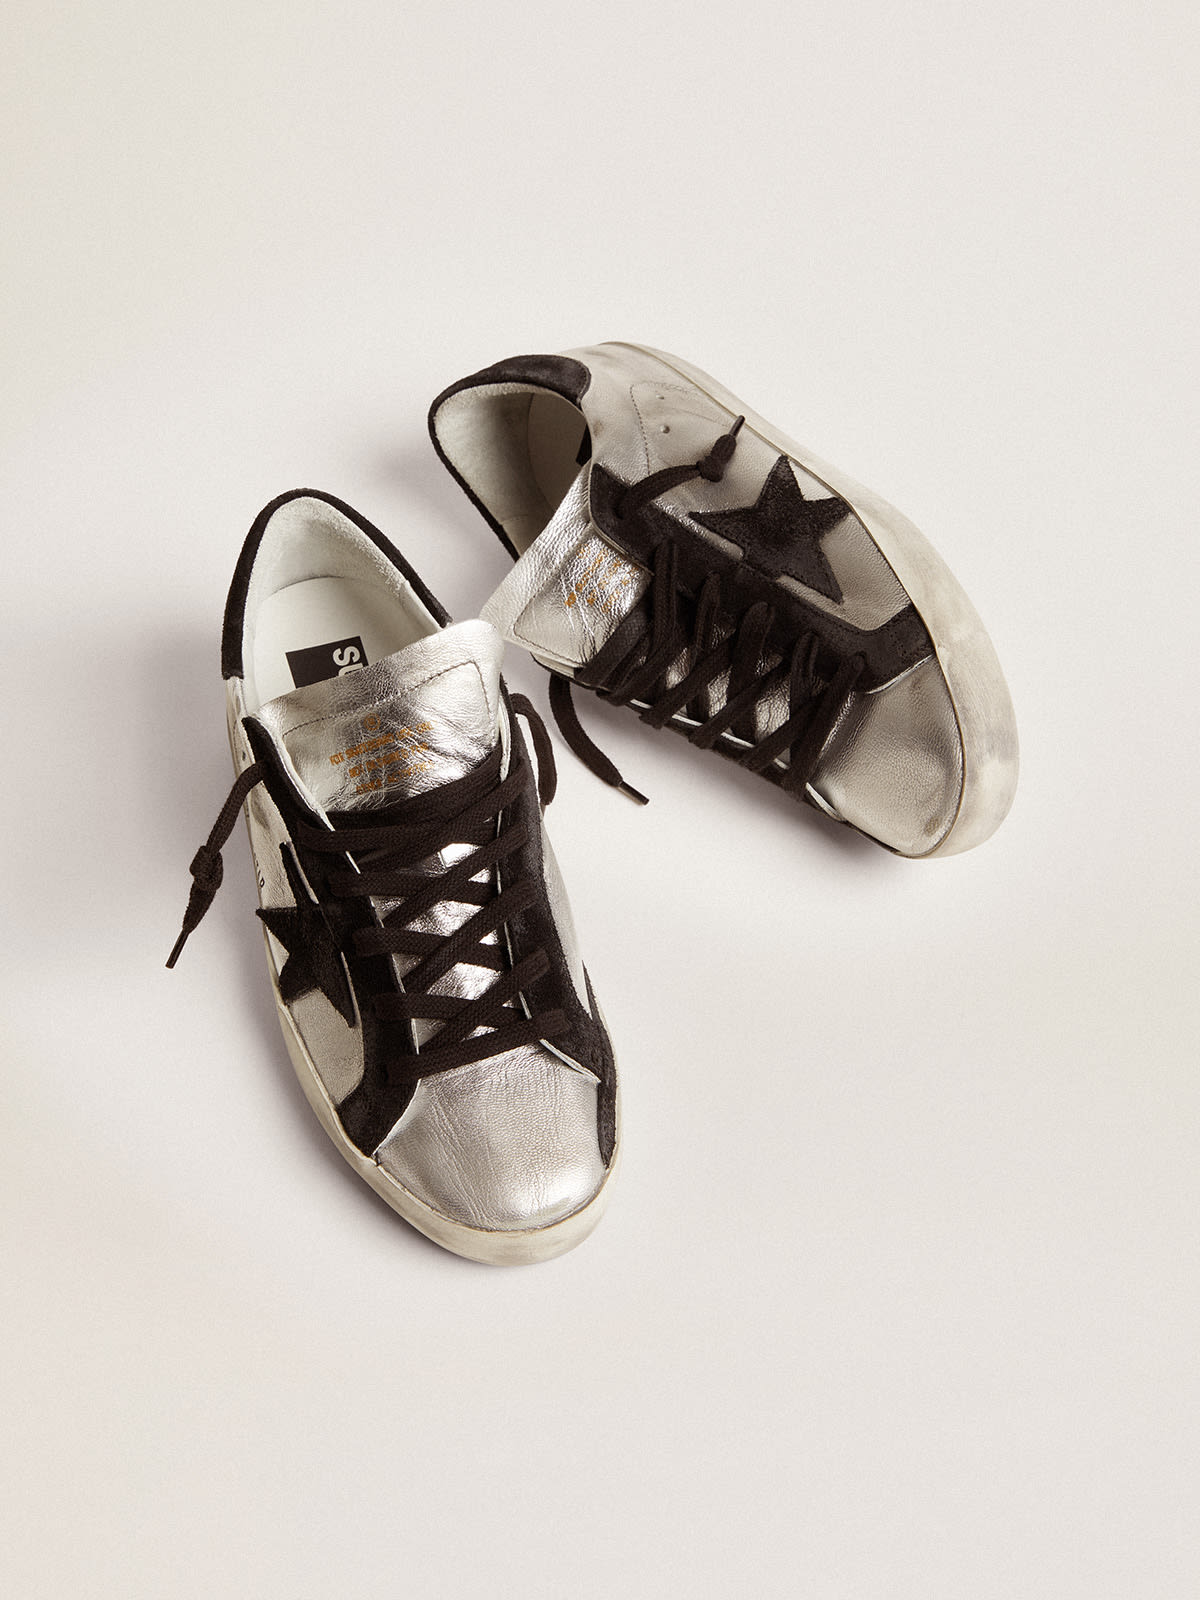 Women’s Super-Star sneakers in silver leather